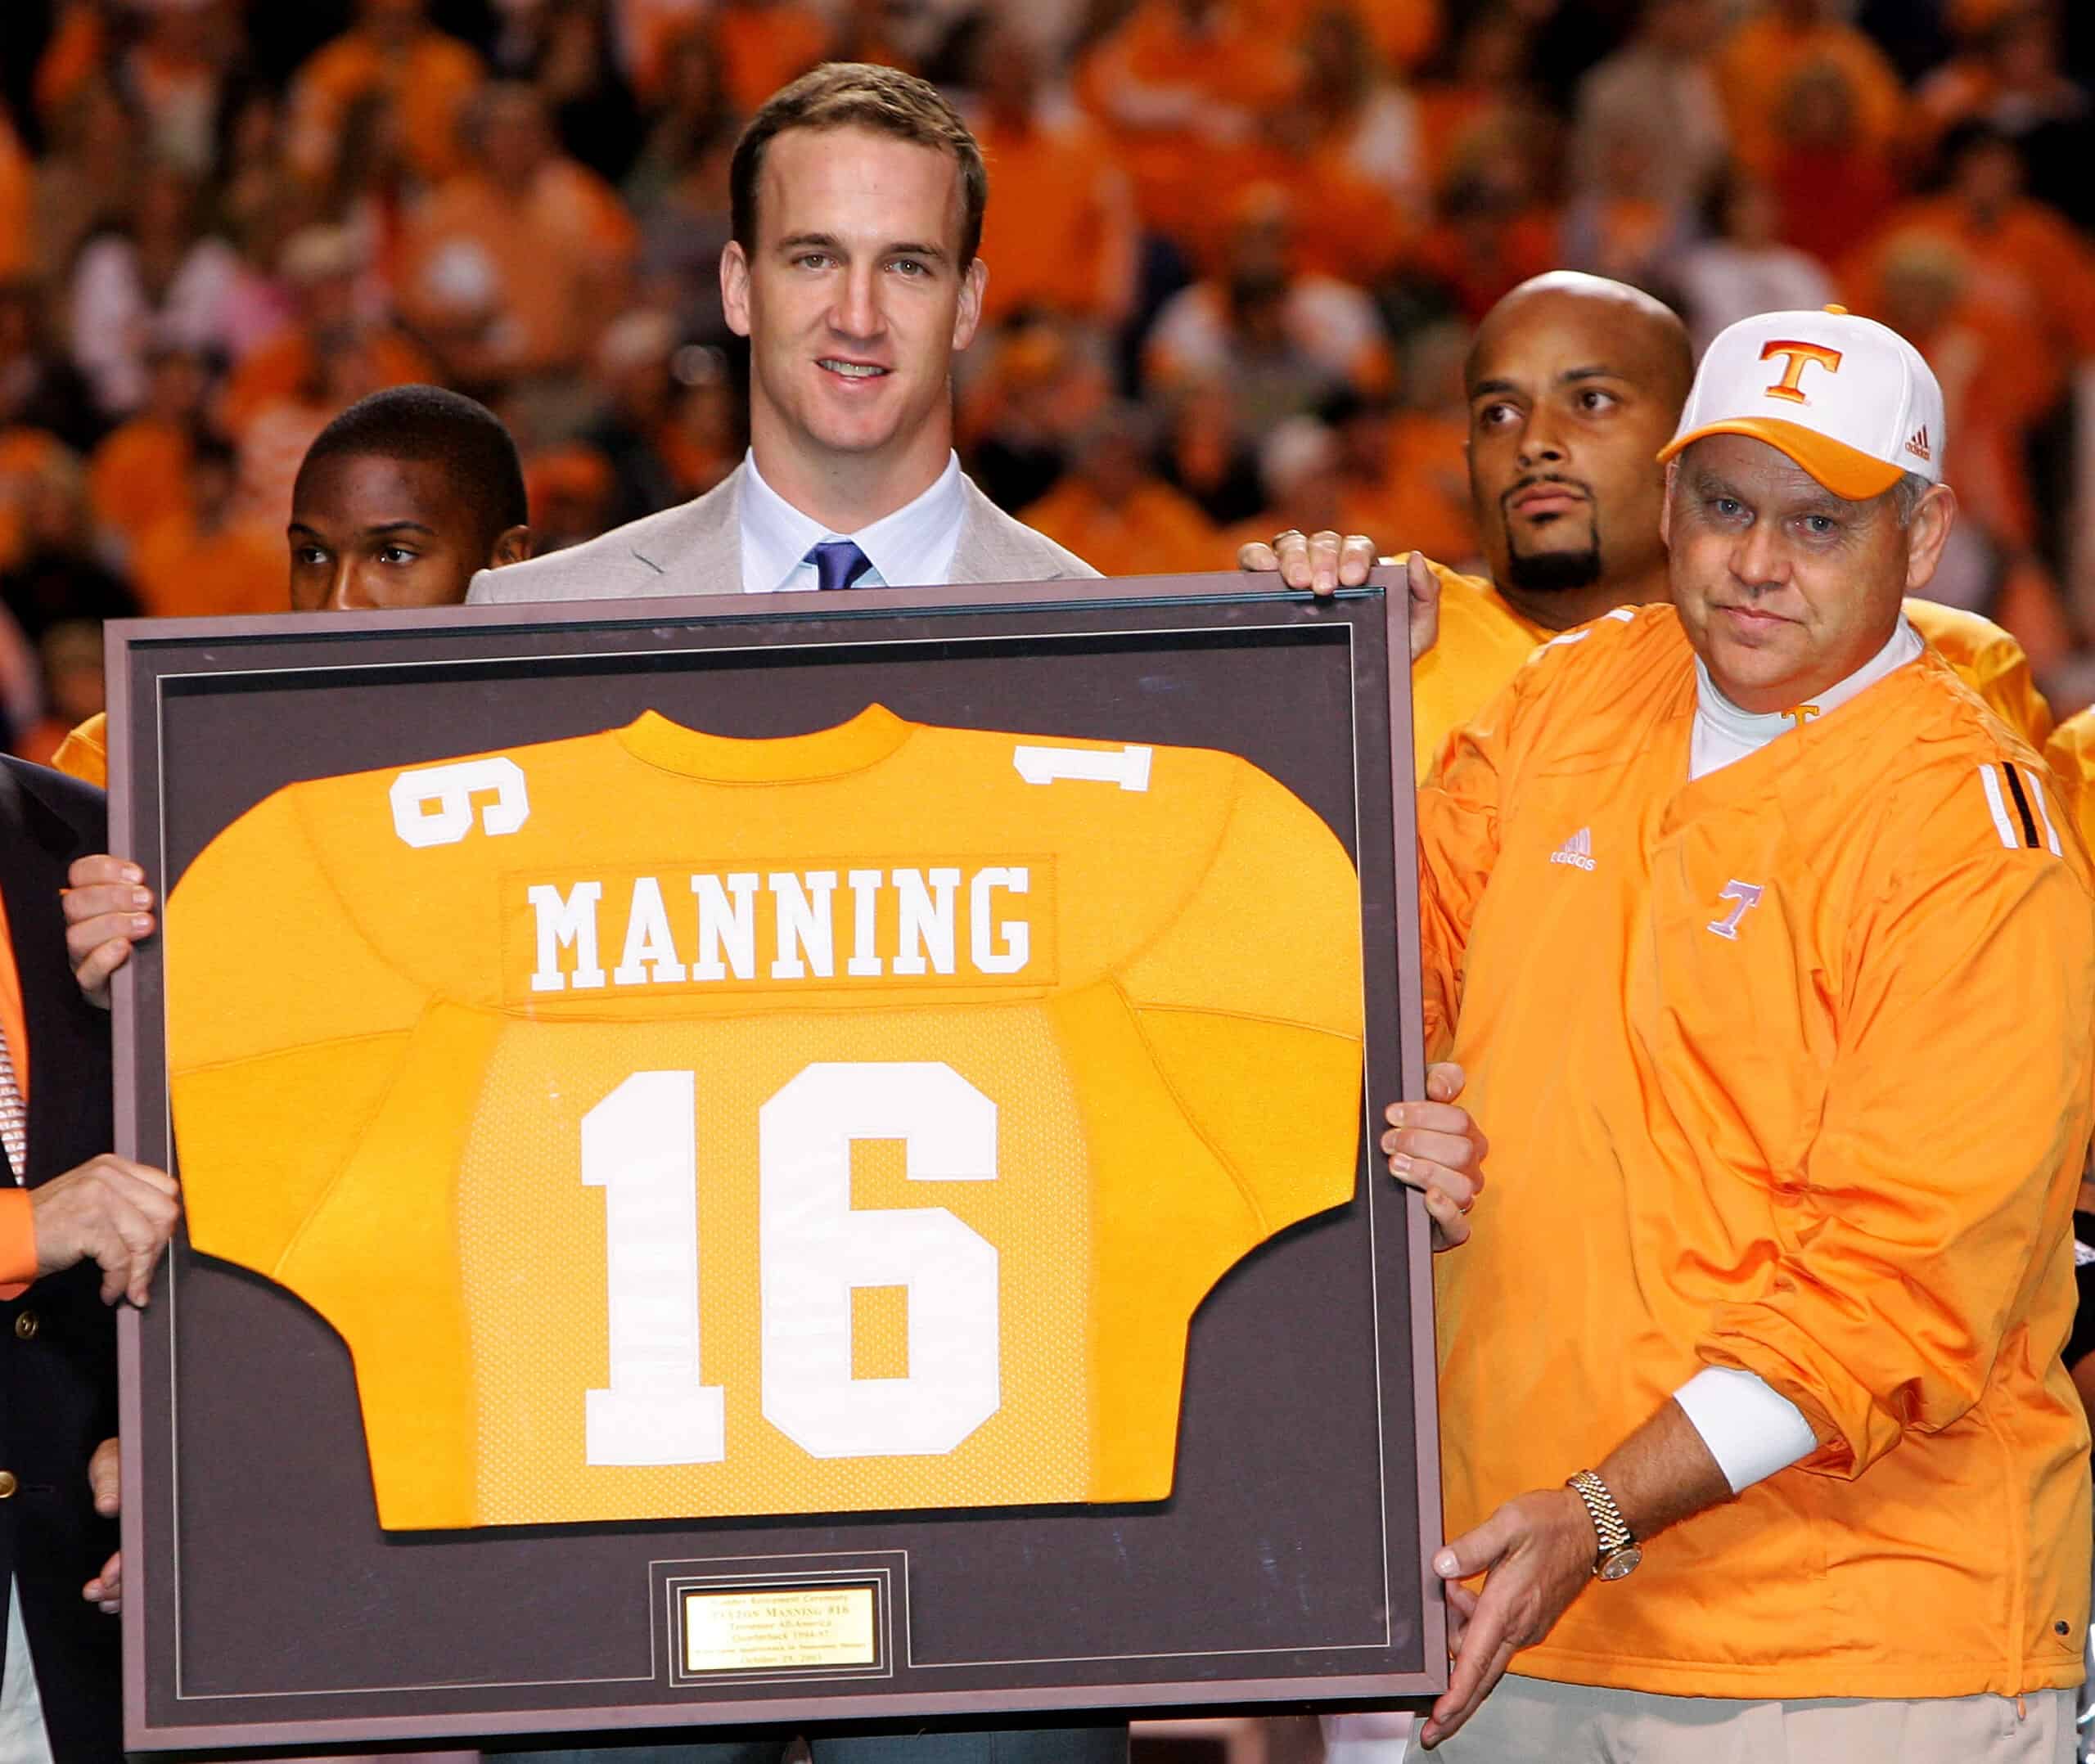 KNOXVILLE, TN - OCTOBER 29: Former Tennesse quarterback Peyton Manning and current quarterback for the Indianapolis Colts is honored alongside his former college coach Phillip Fulmer before the start of the game against the South Carolina Gamecocks on October 29, 2005 at Neyland Stadium in Knoxville, Tennessee. (Photo by Streeter Lecka/Getty Images)